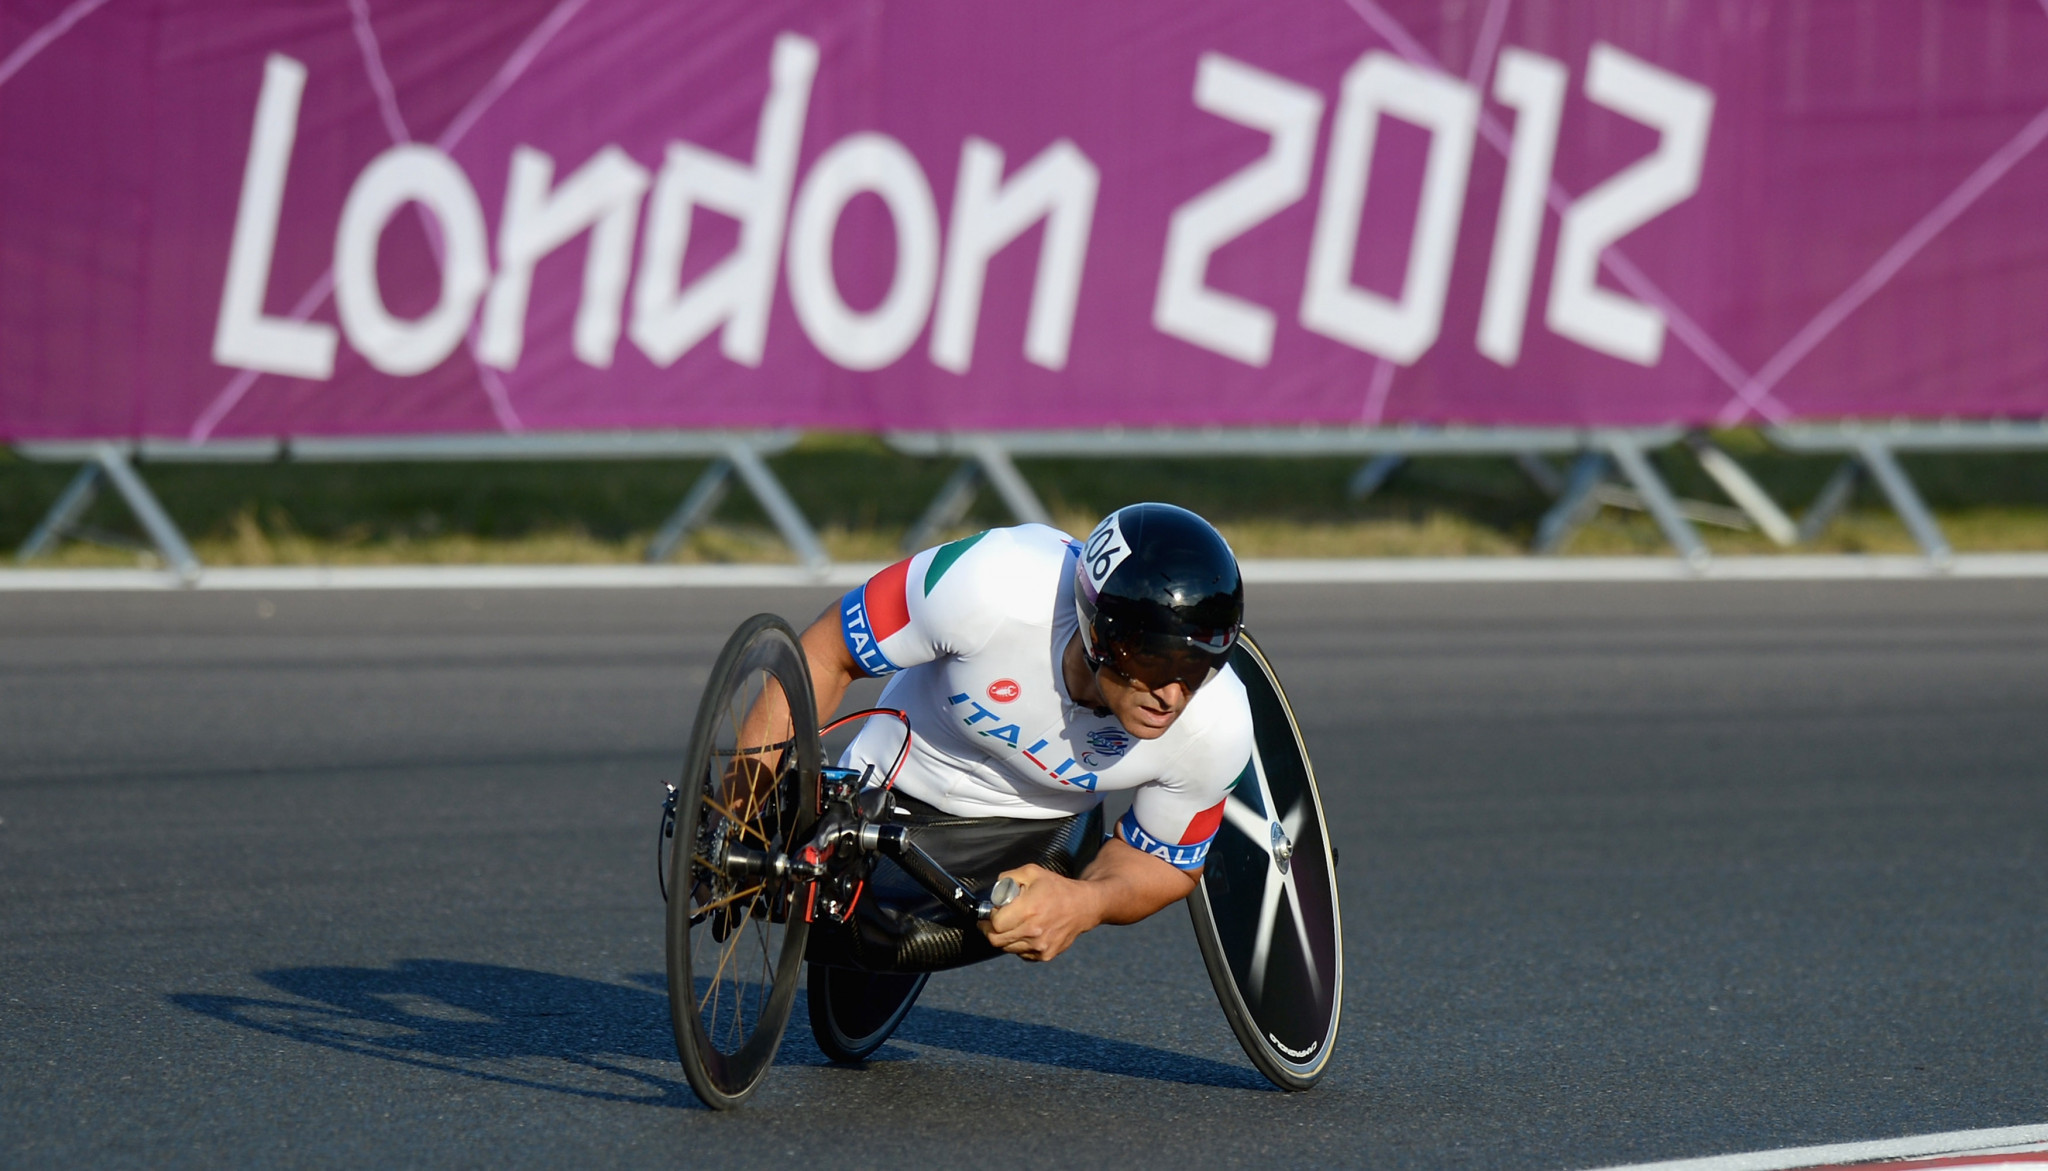 Following an accident which saw him lose both legs, Alex Zanardi took up handcycling and competed at London 2012 and Rio 2016, winning six medals, including four gold ©Getty Images